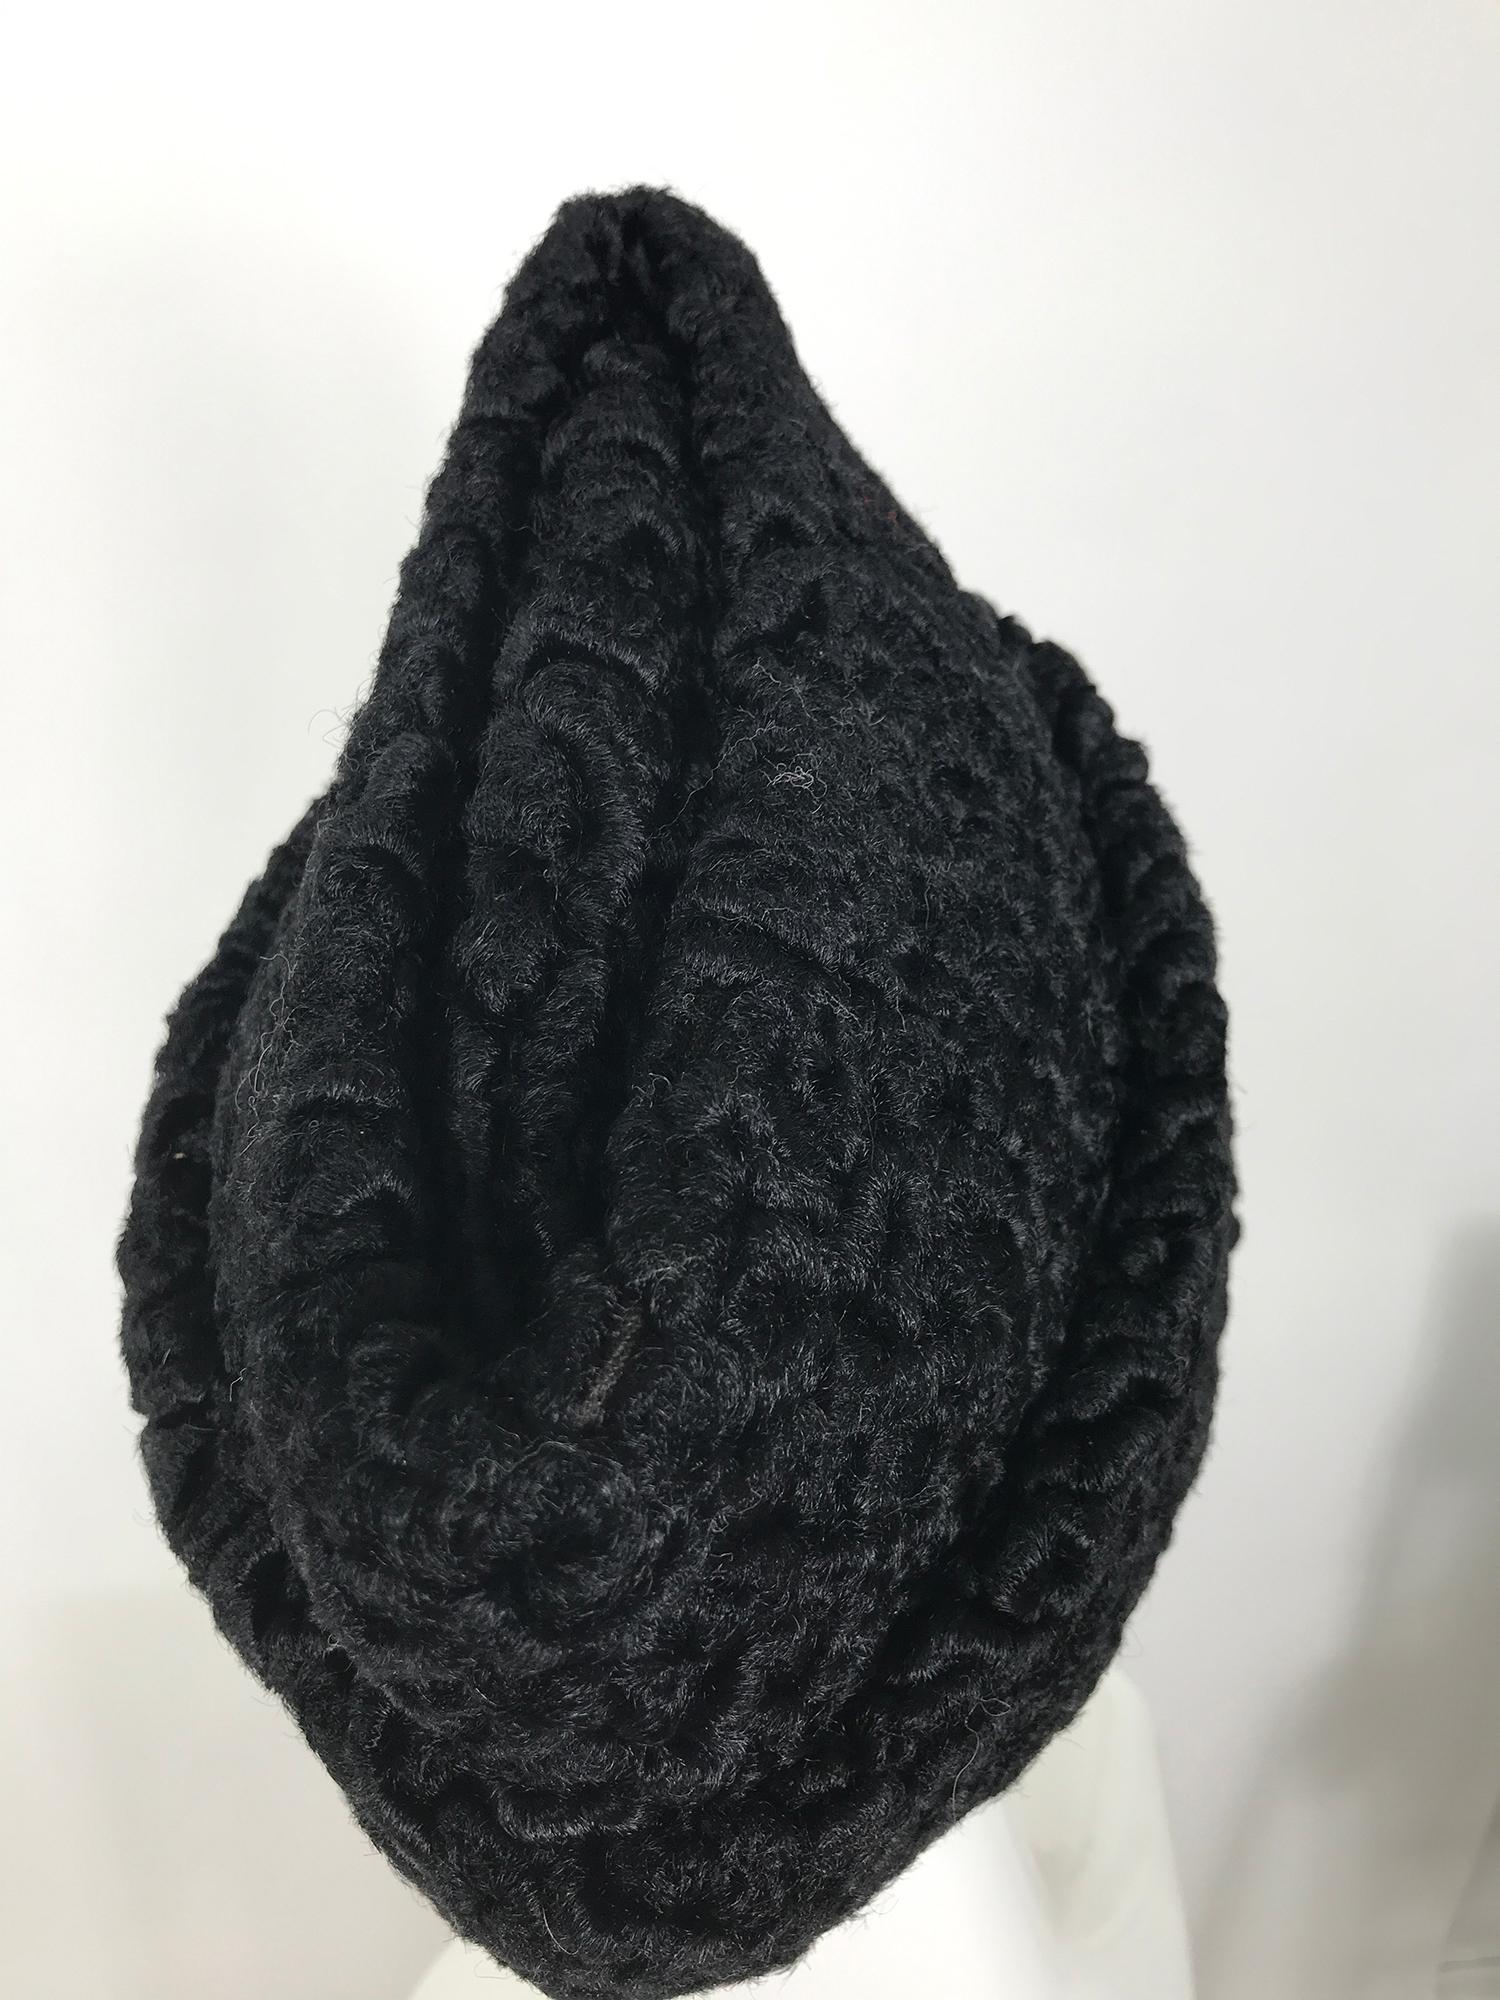 1940s Black Persian Lamb Angled Hat and Muff Purse Vintage For Sale 3